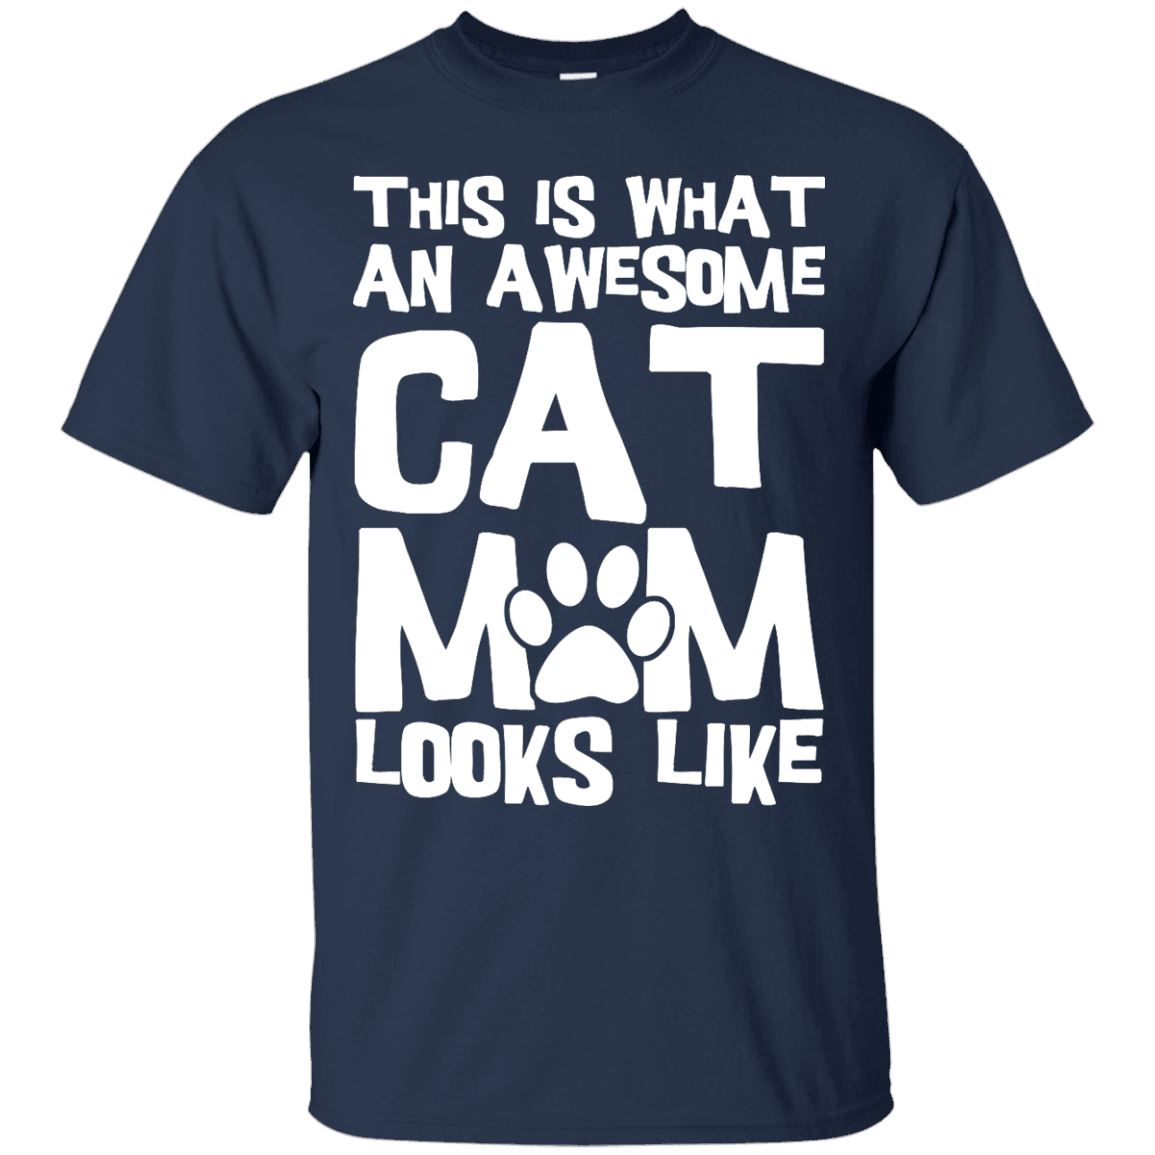 Cat Tee - This Is What An Awesome Cat Mom Looks Like - CatsForLife